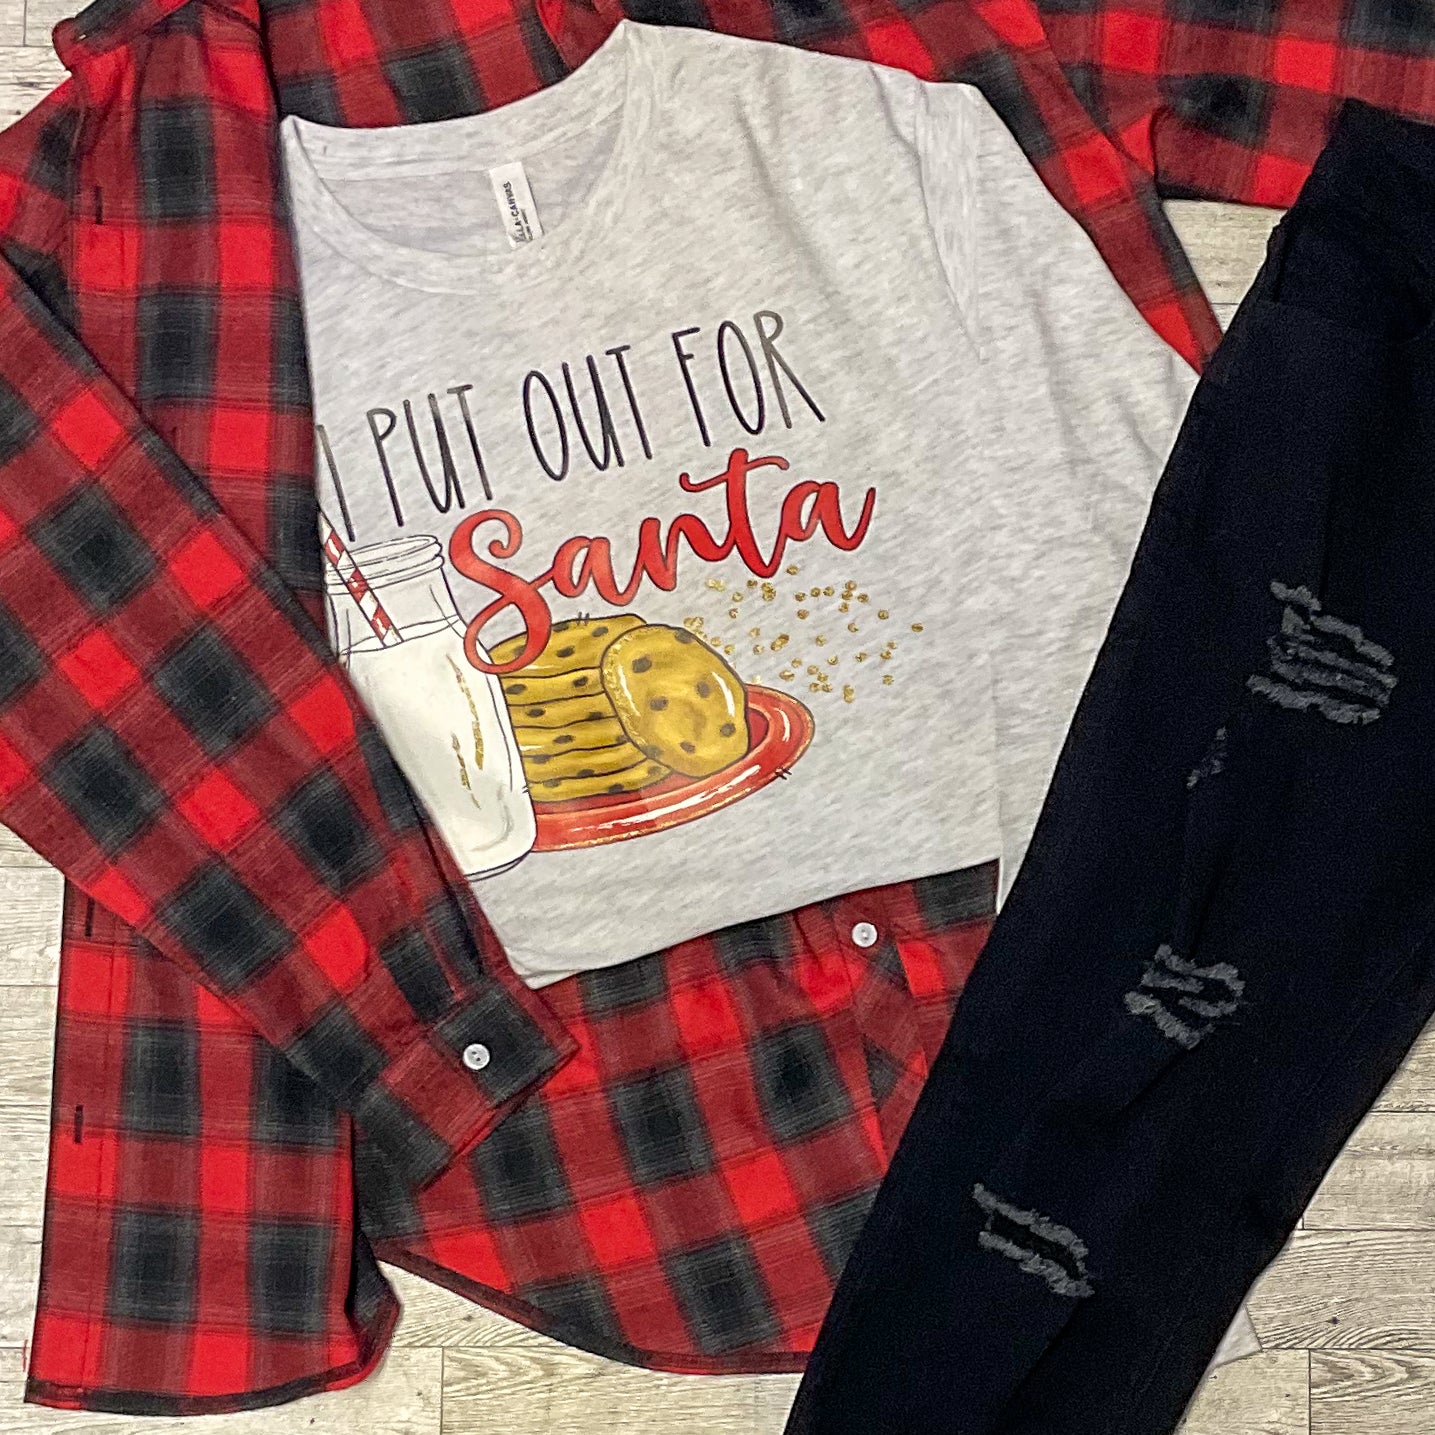 I Put Out For Santa Tee